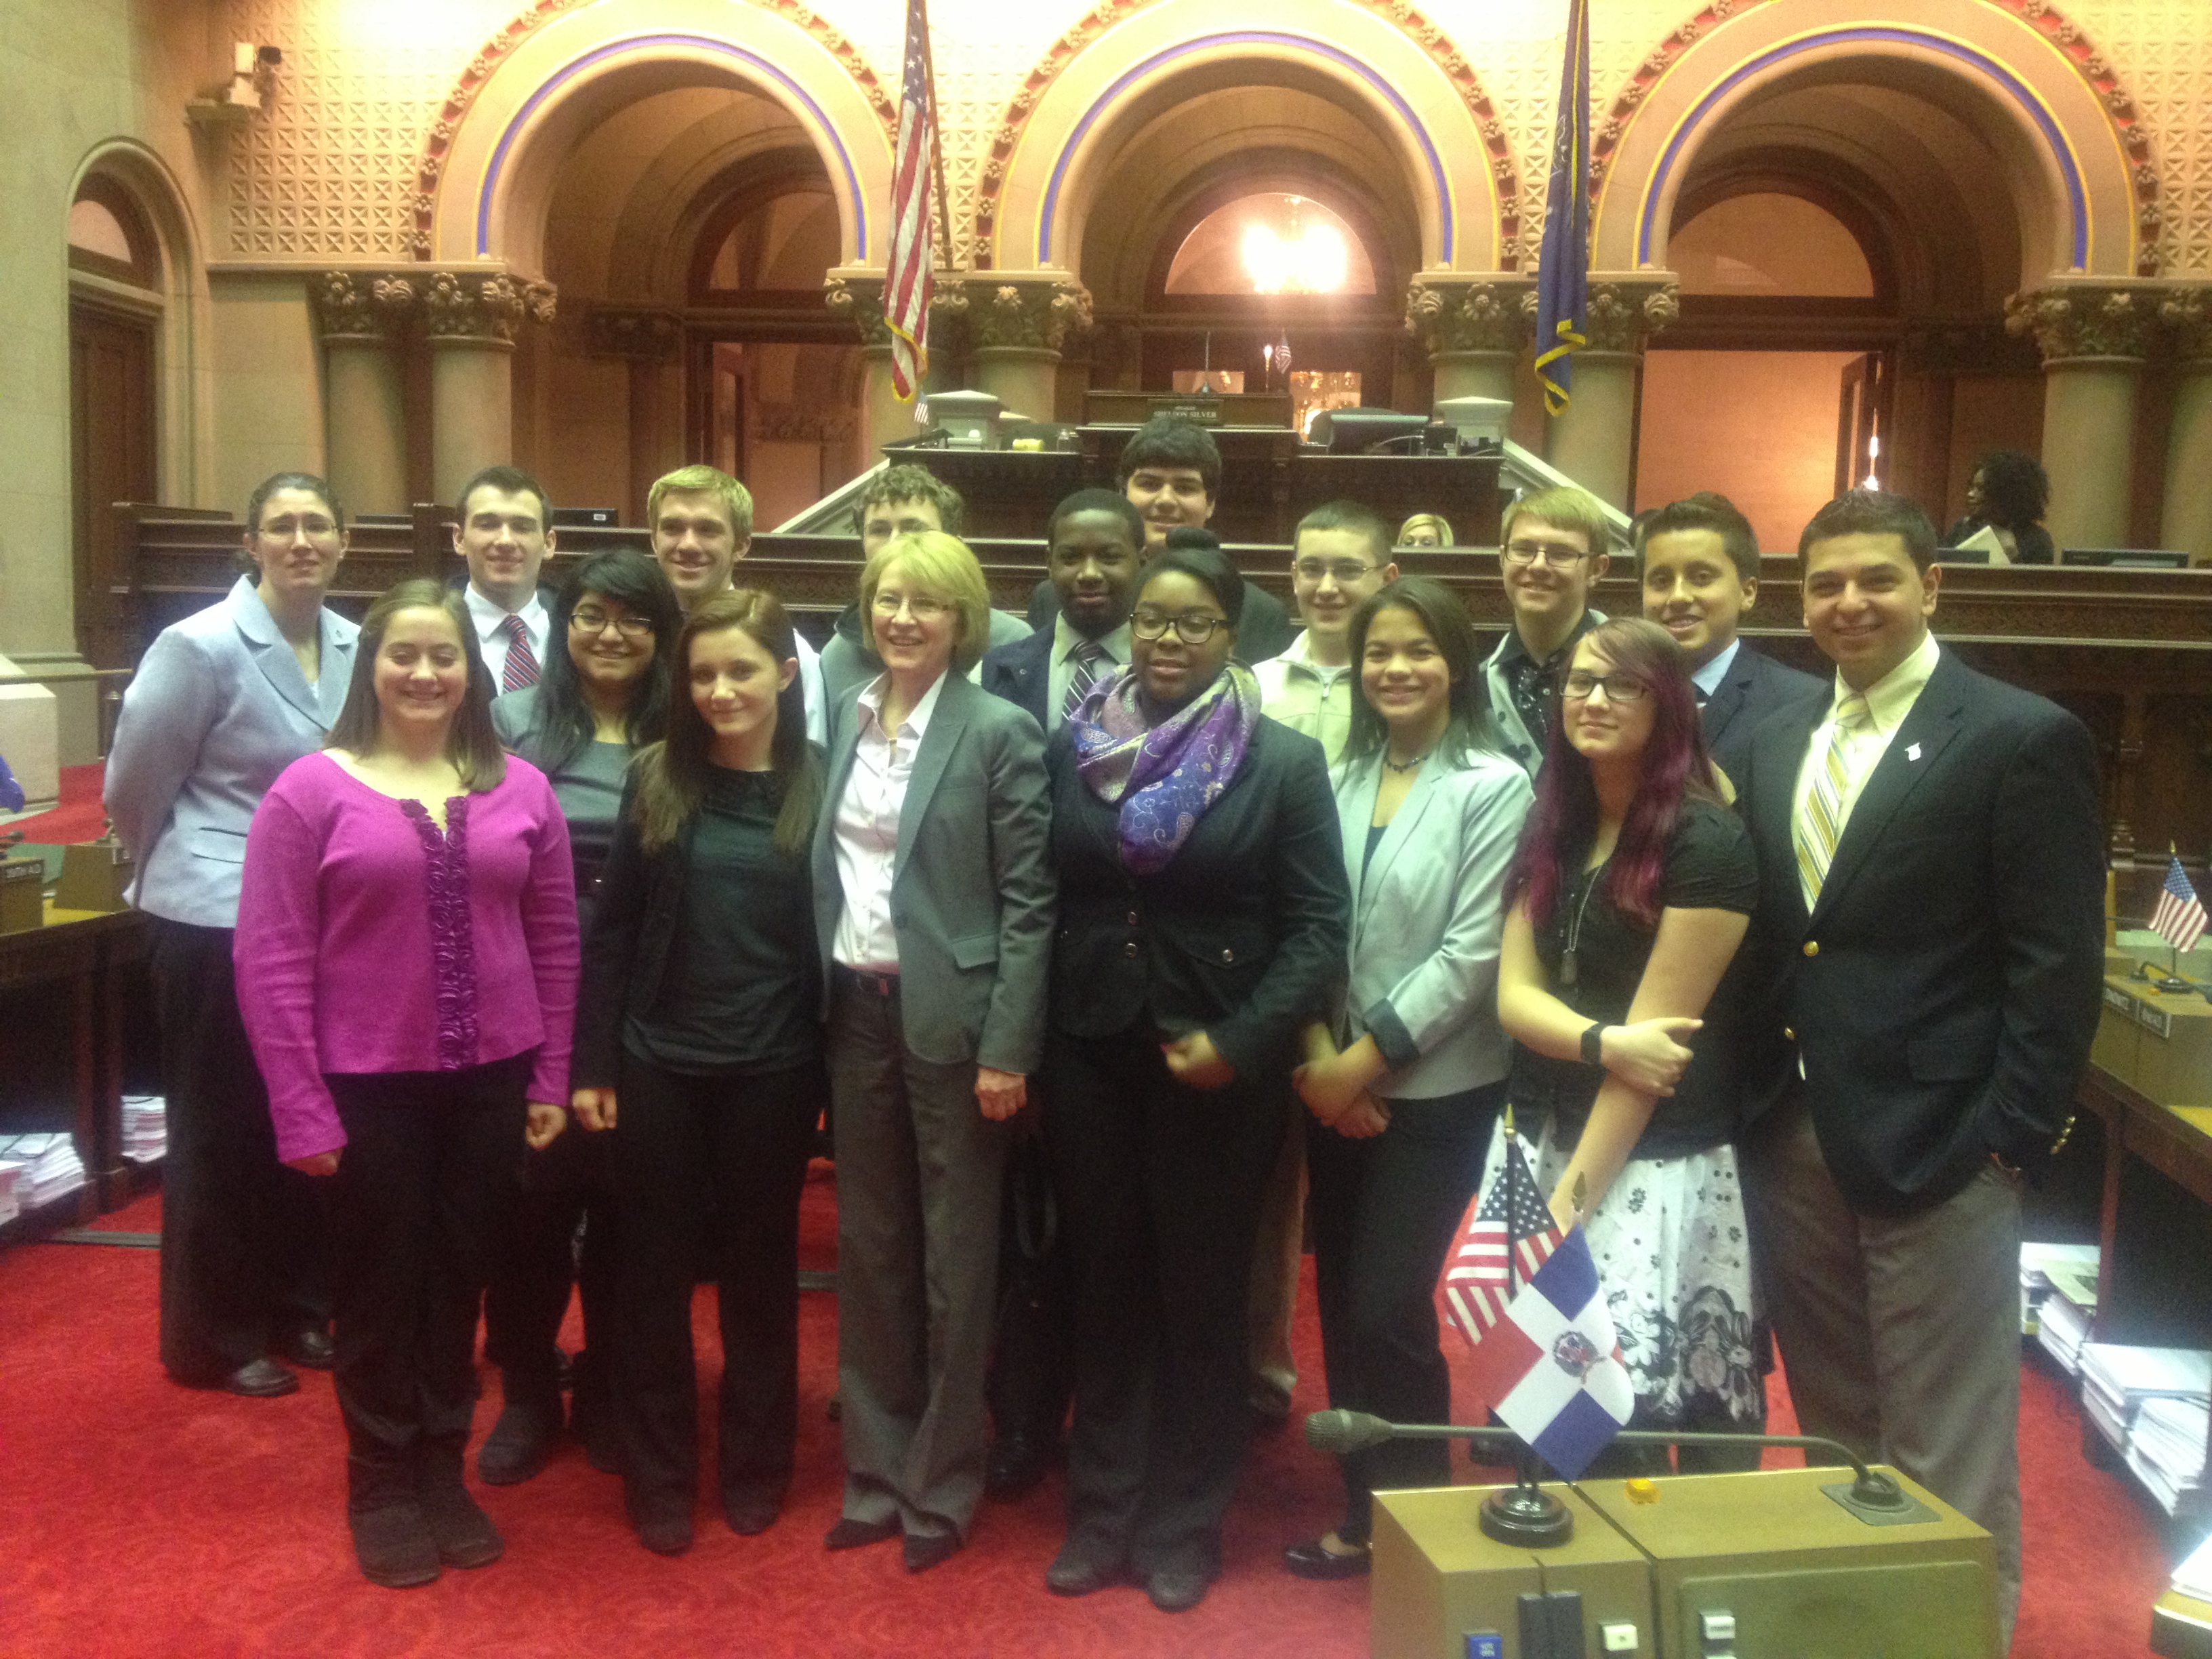 Assemblywoman Gunther was visited by members of the Orange County Youth Bureau in Albany.